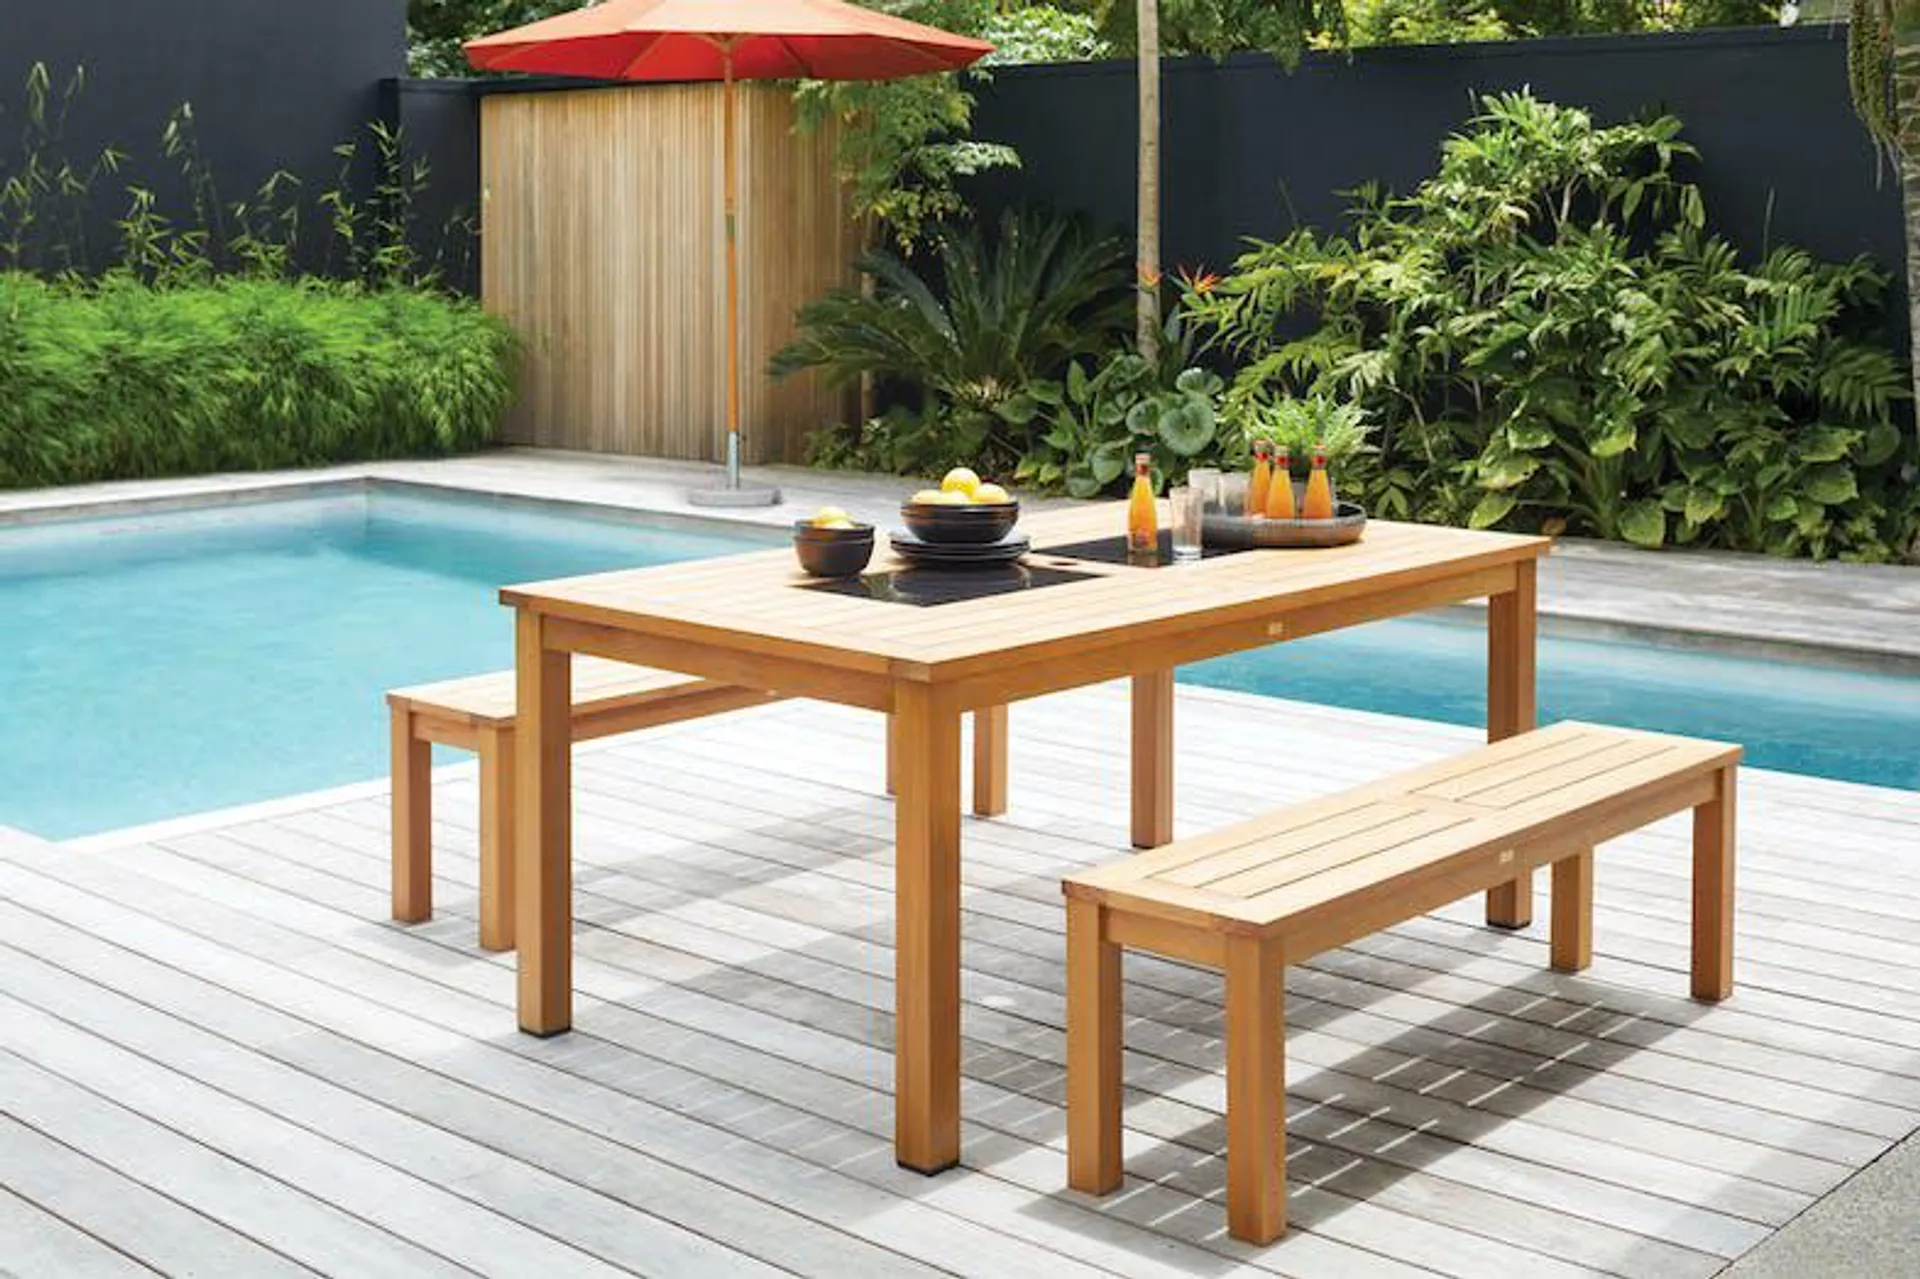 Seychelles 3 Piece Outdoor Dining Setting